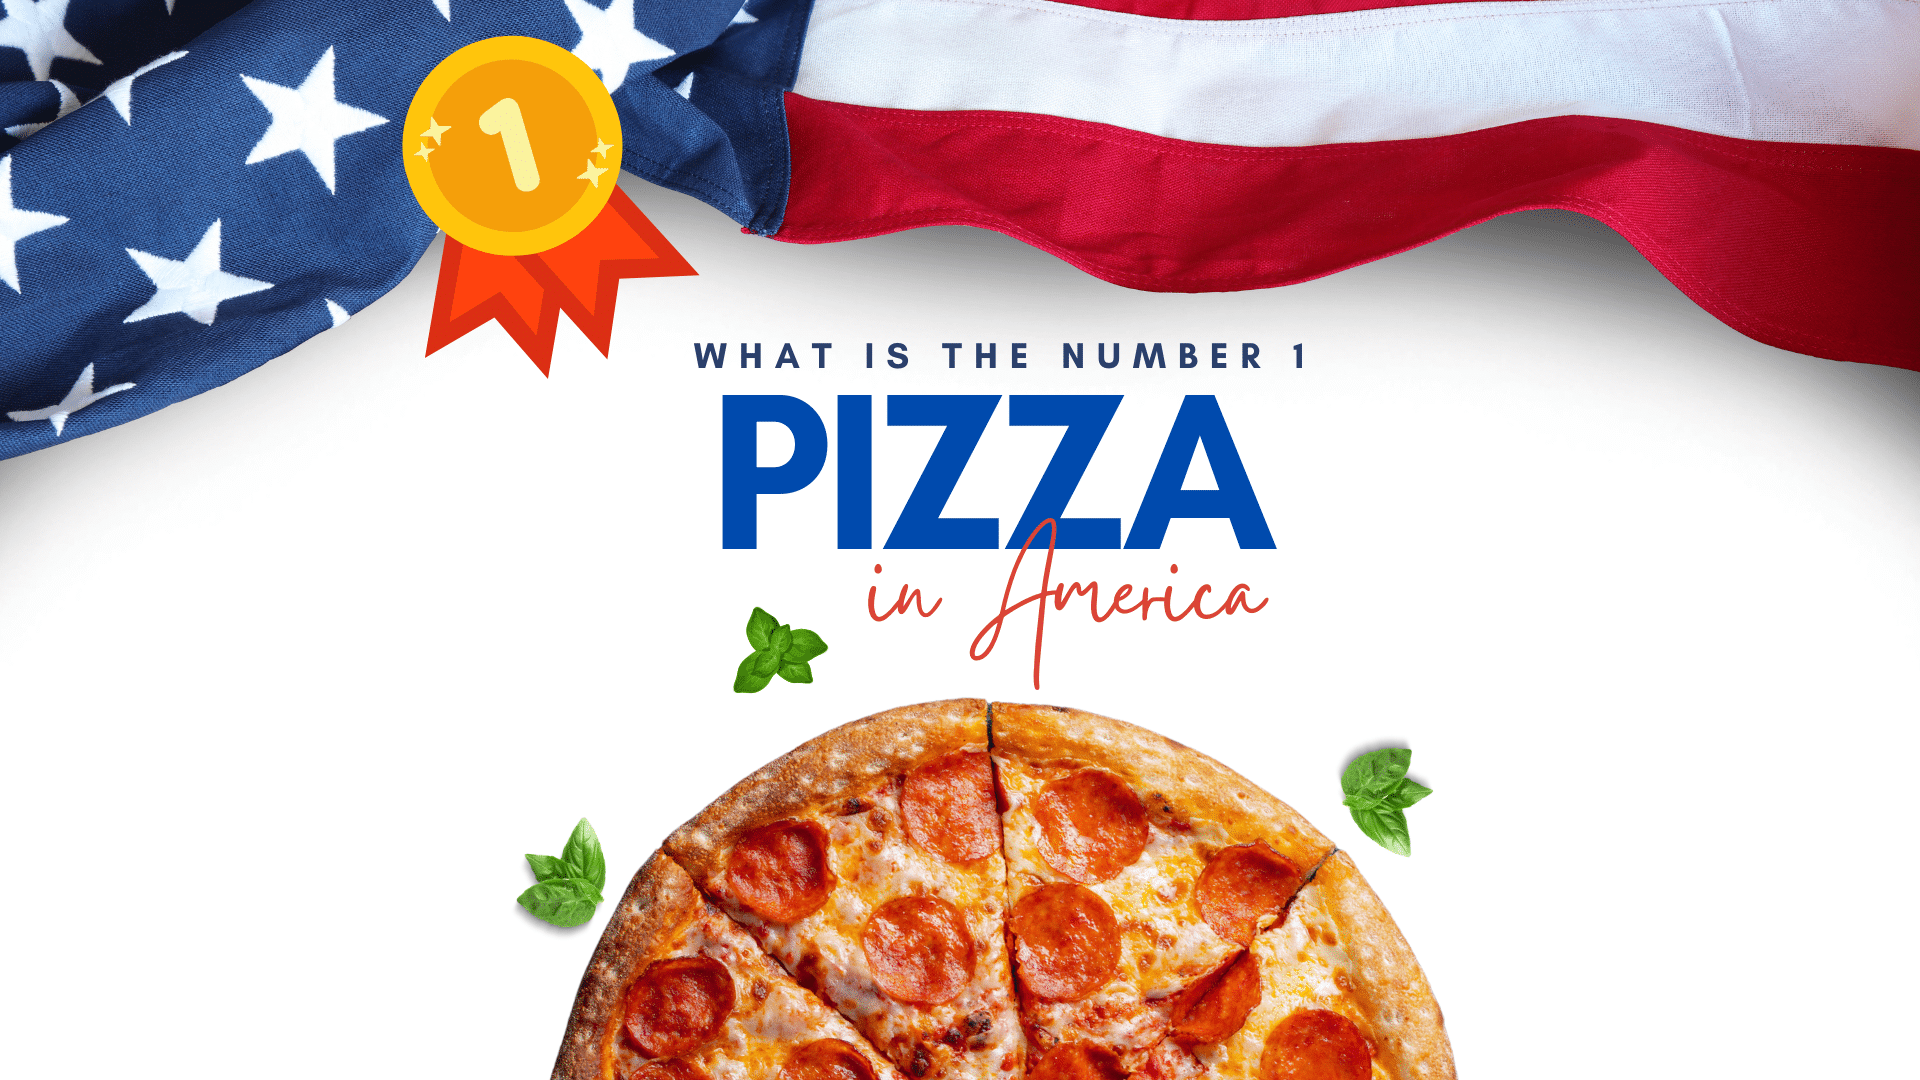 What is the number 1 pizza in America